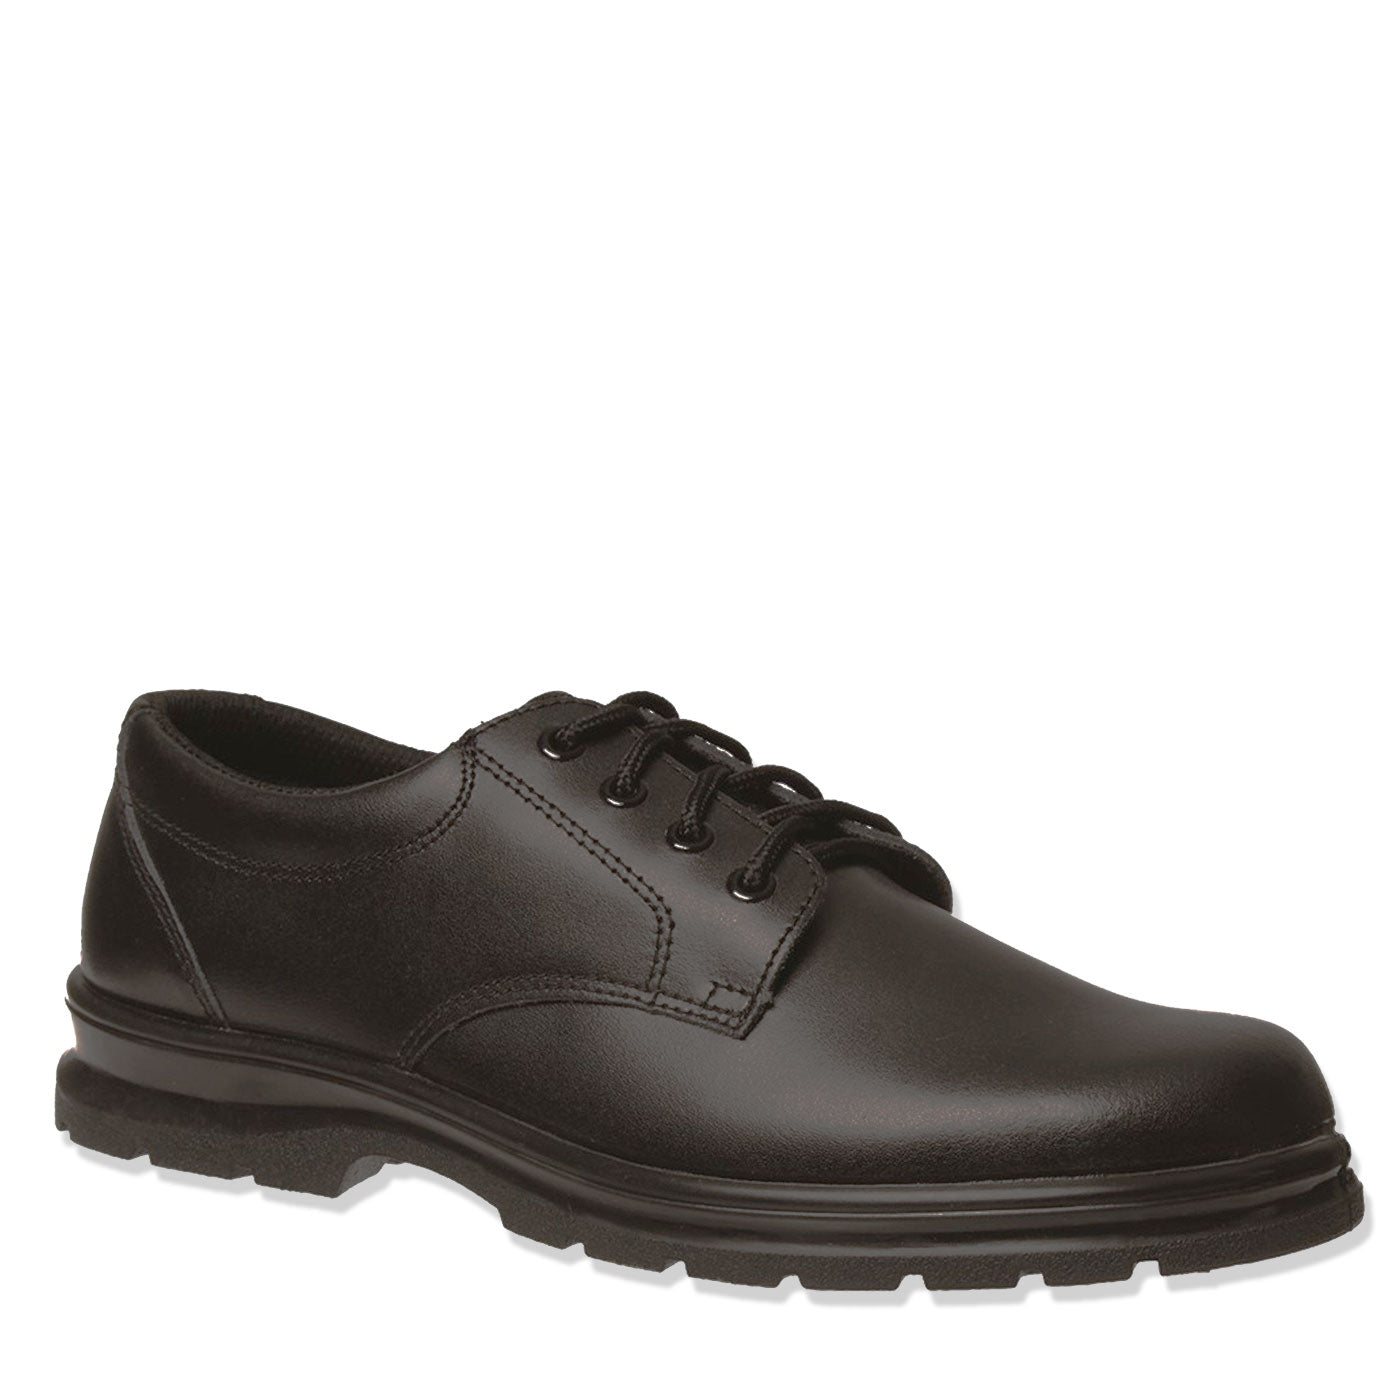 Grosby Leather Shoes Black Educate JNR 2